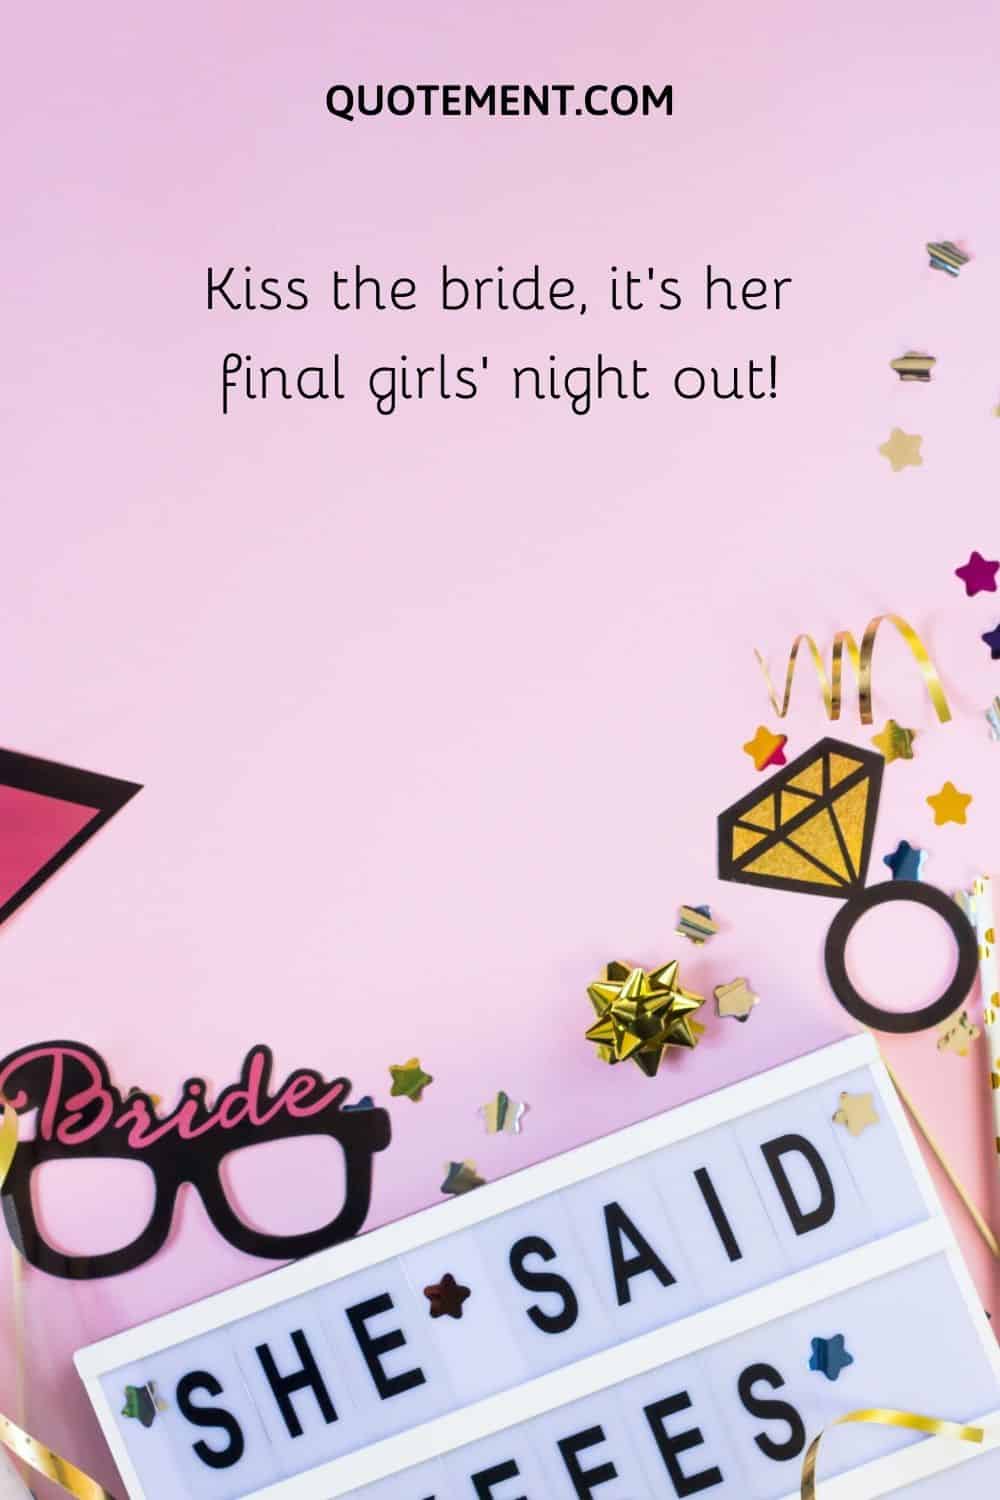 Kiss the bride, it’s her final girls’ night out!